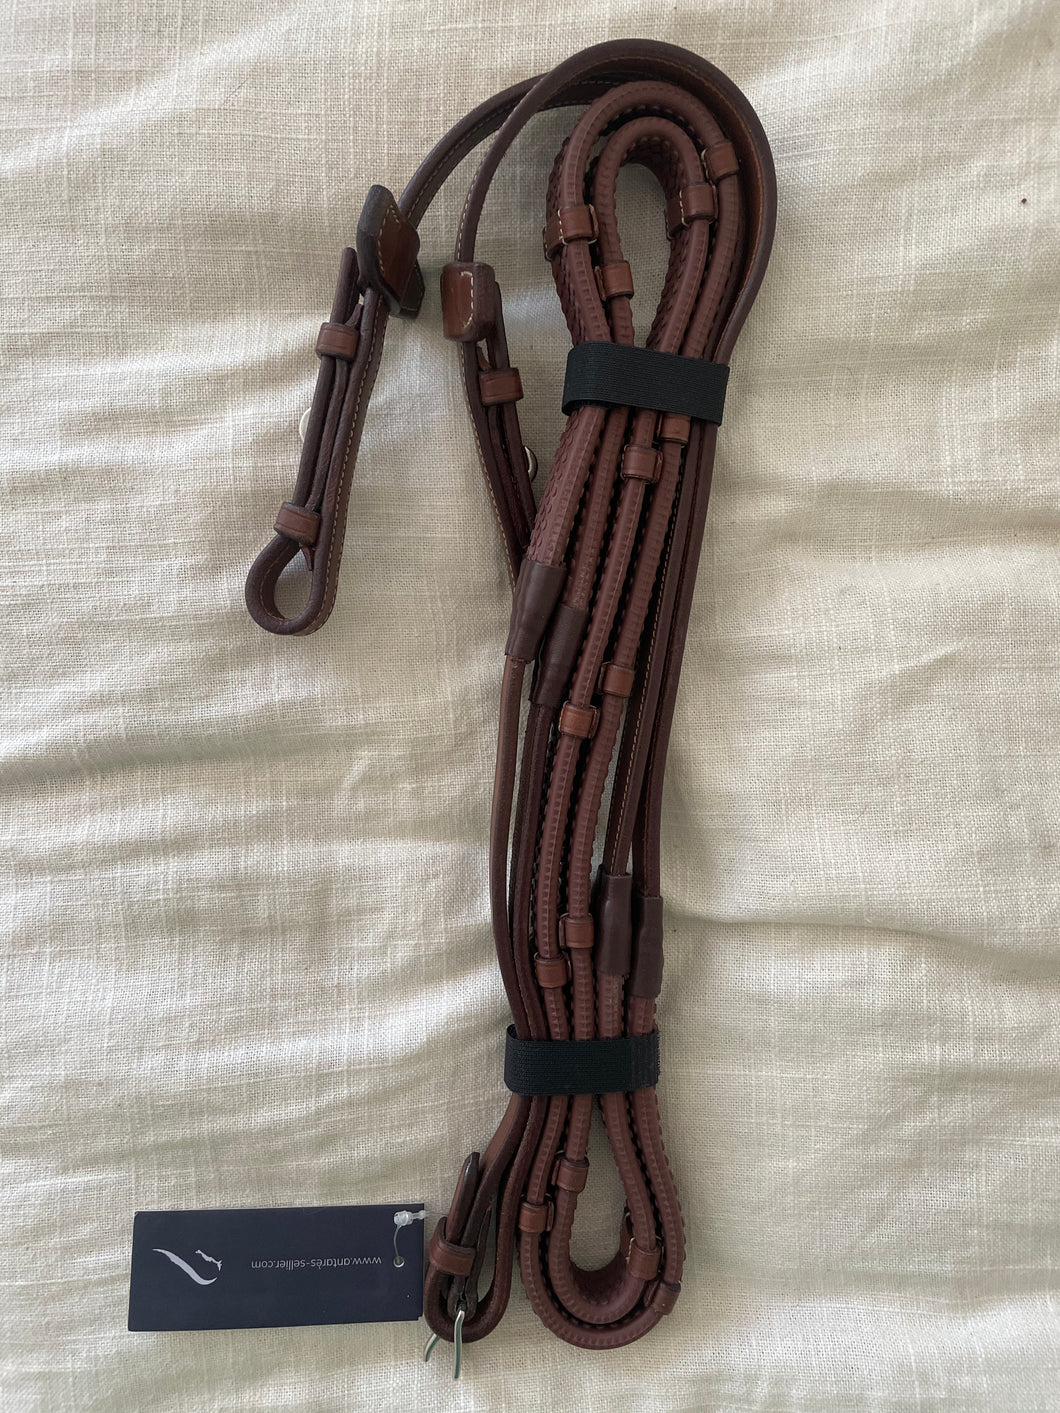 Antares Precision Rubber Reins, Brown - New with Tags